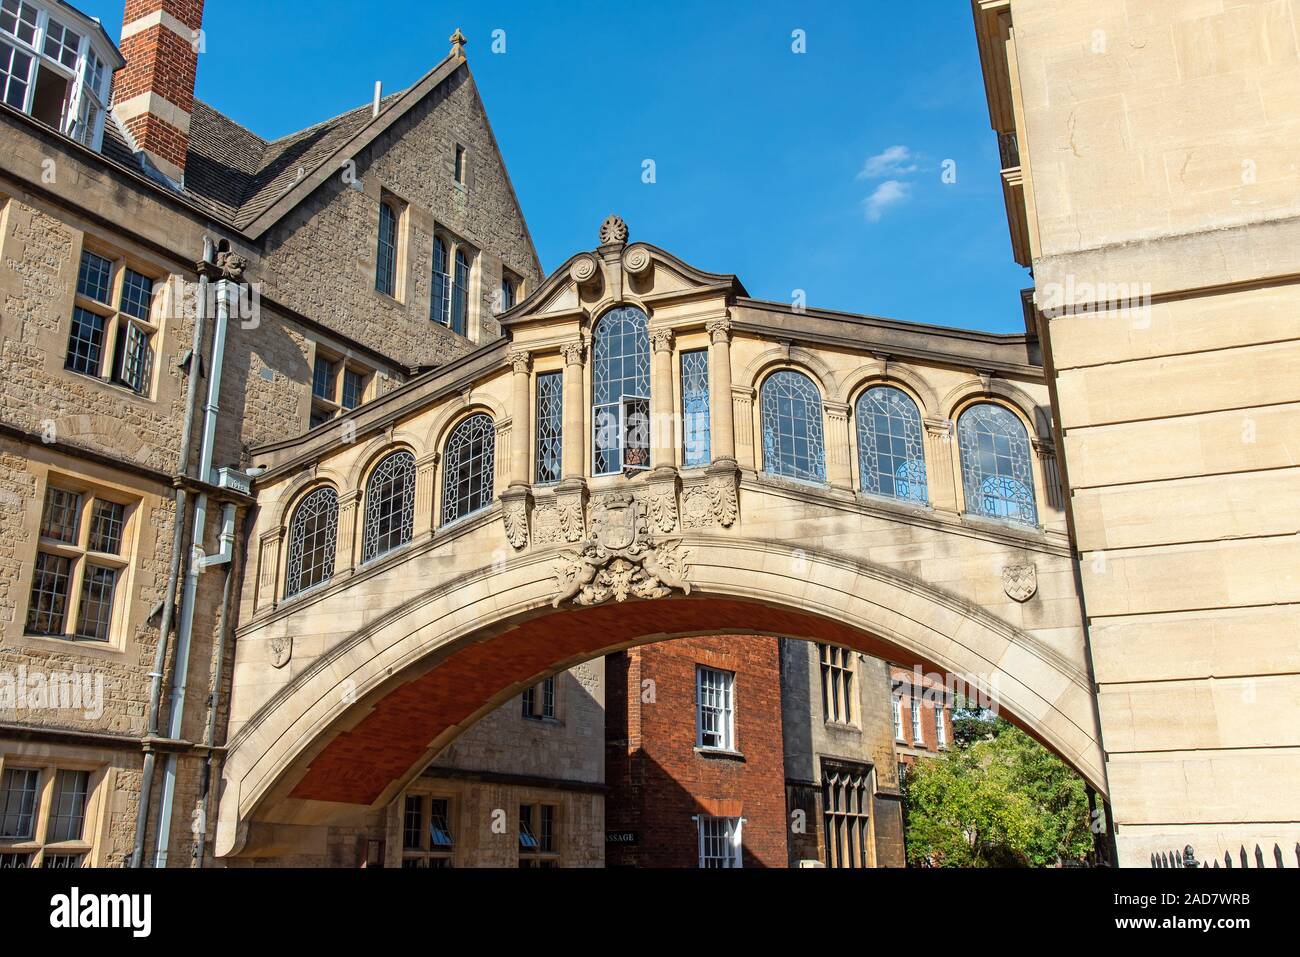 The famous Bridge of Sighs in Oxford, England Stock Photo